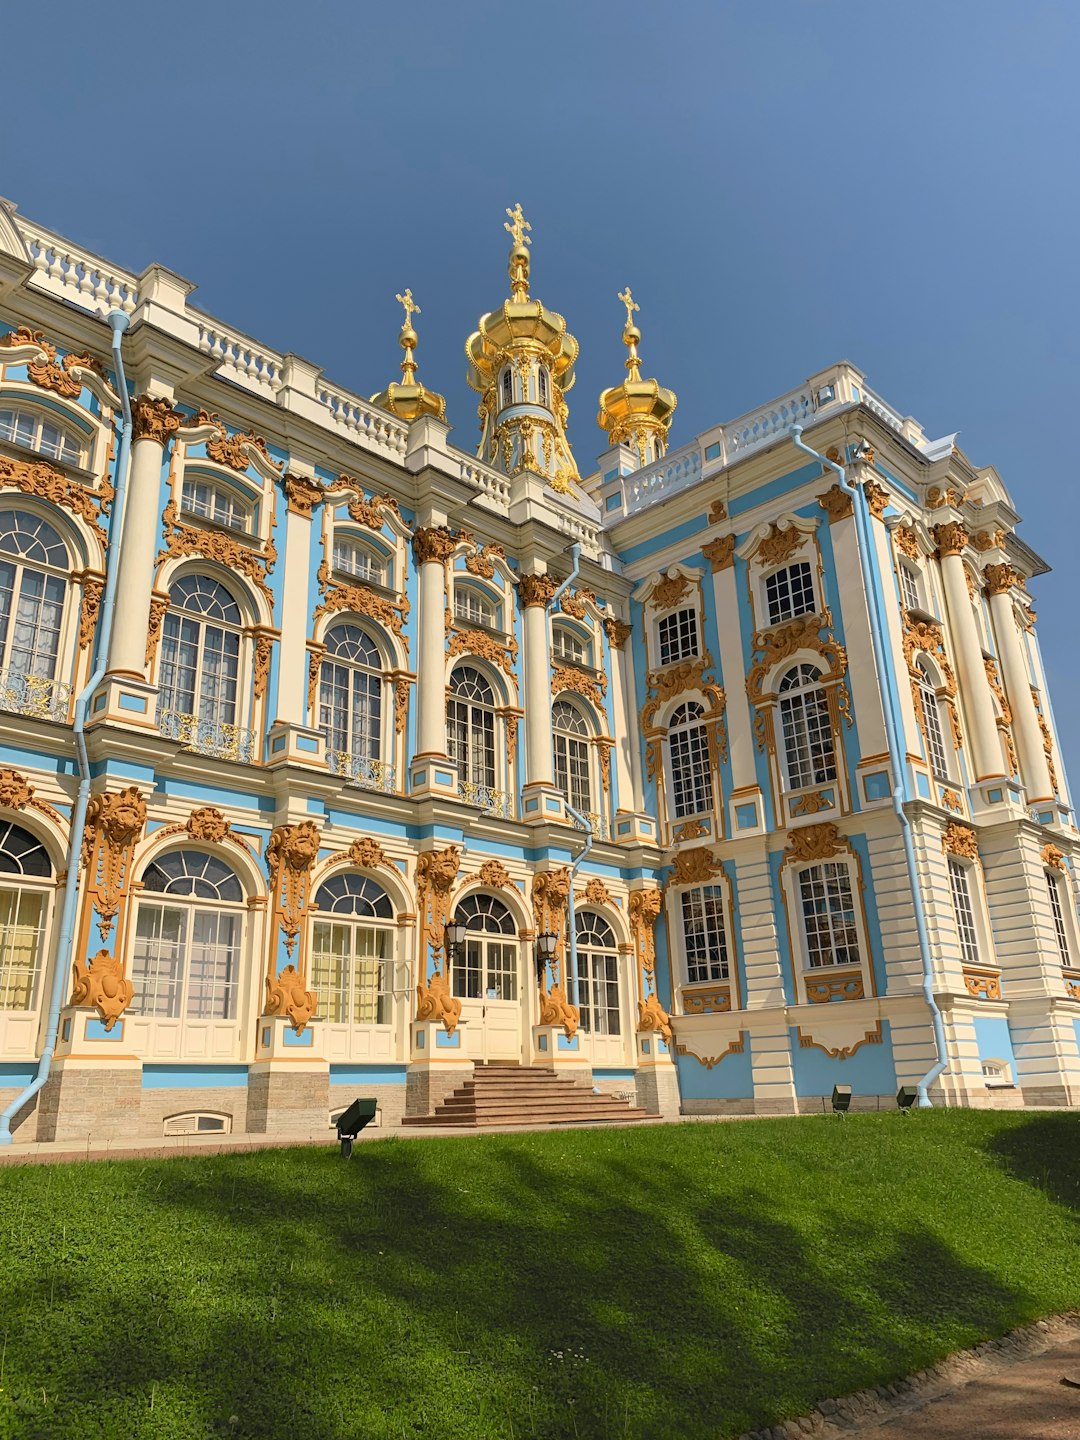 Travel Tips and Stories of Pushkin Catherine Palace in Russia